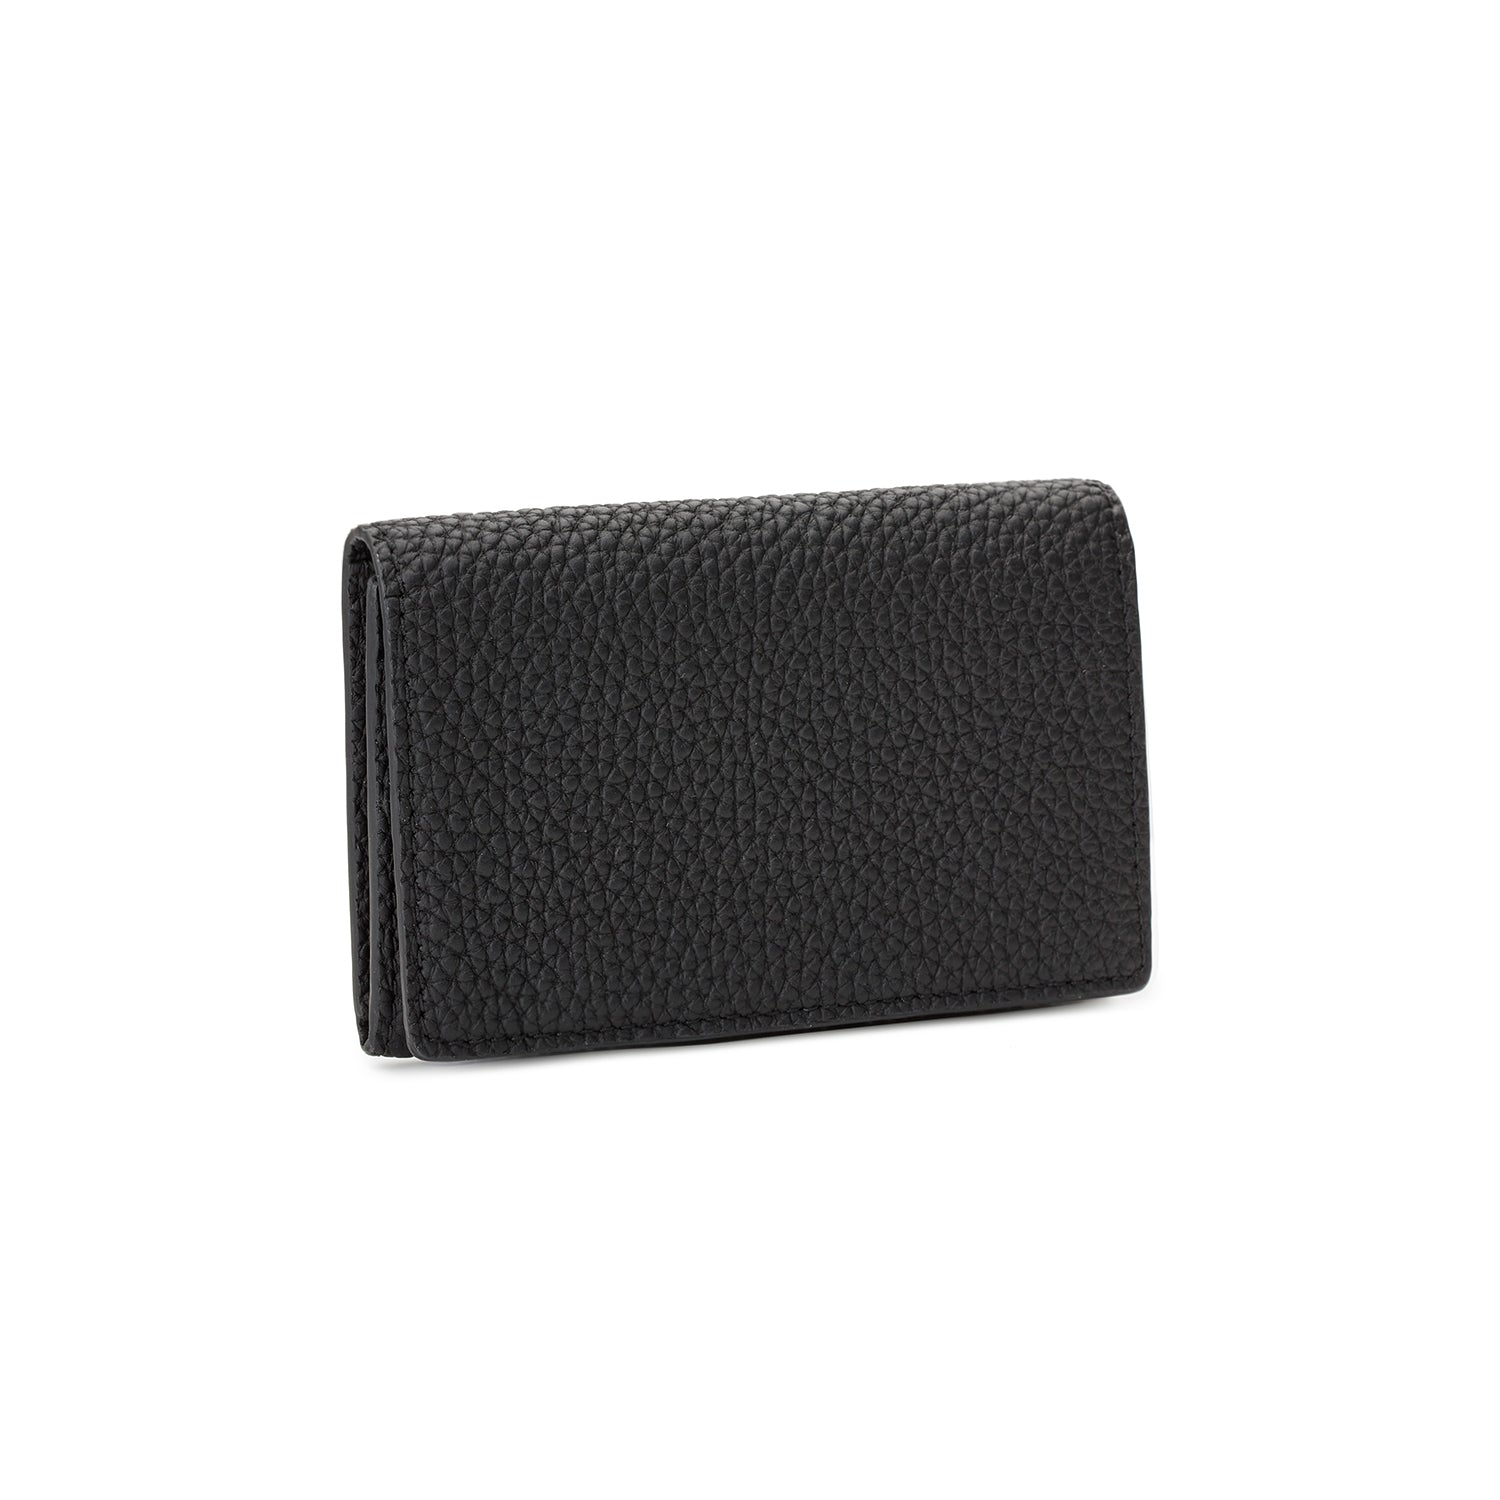 SAVOIA × BONAVENTURA Business card case with sleeve in shrink leather